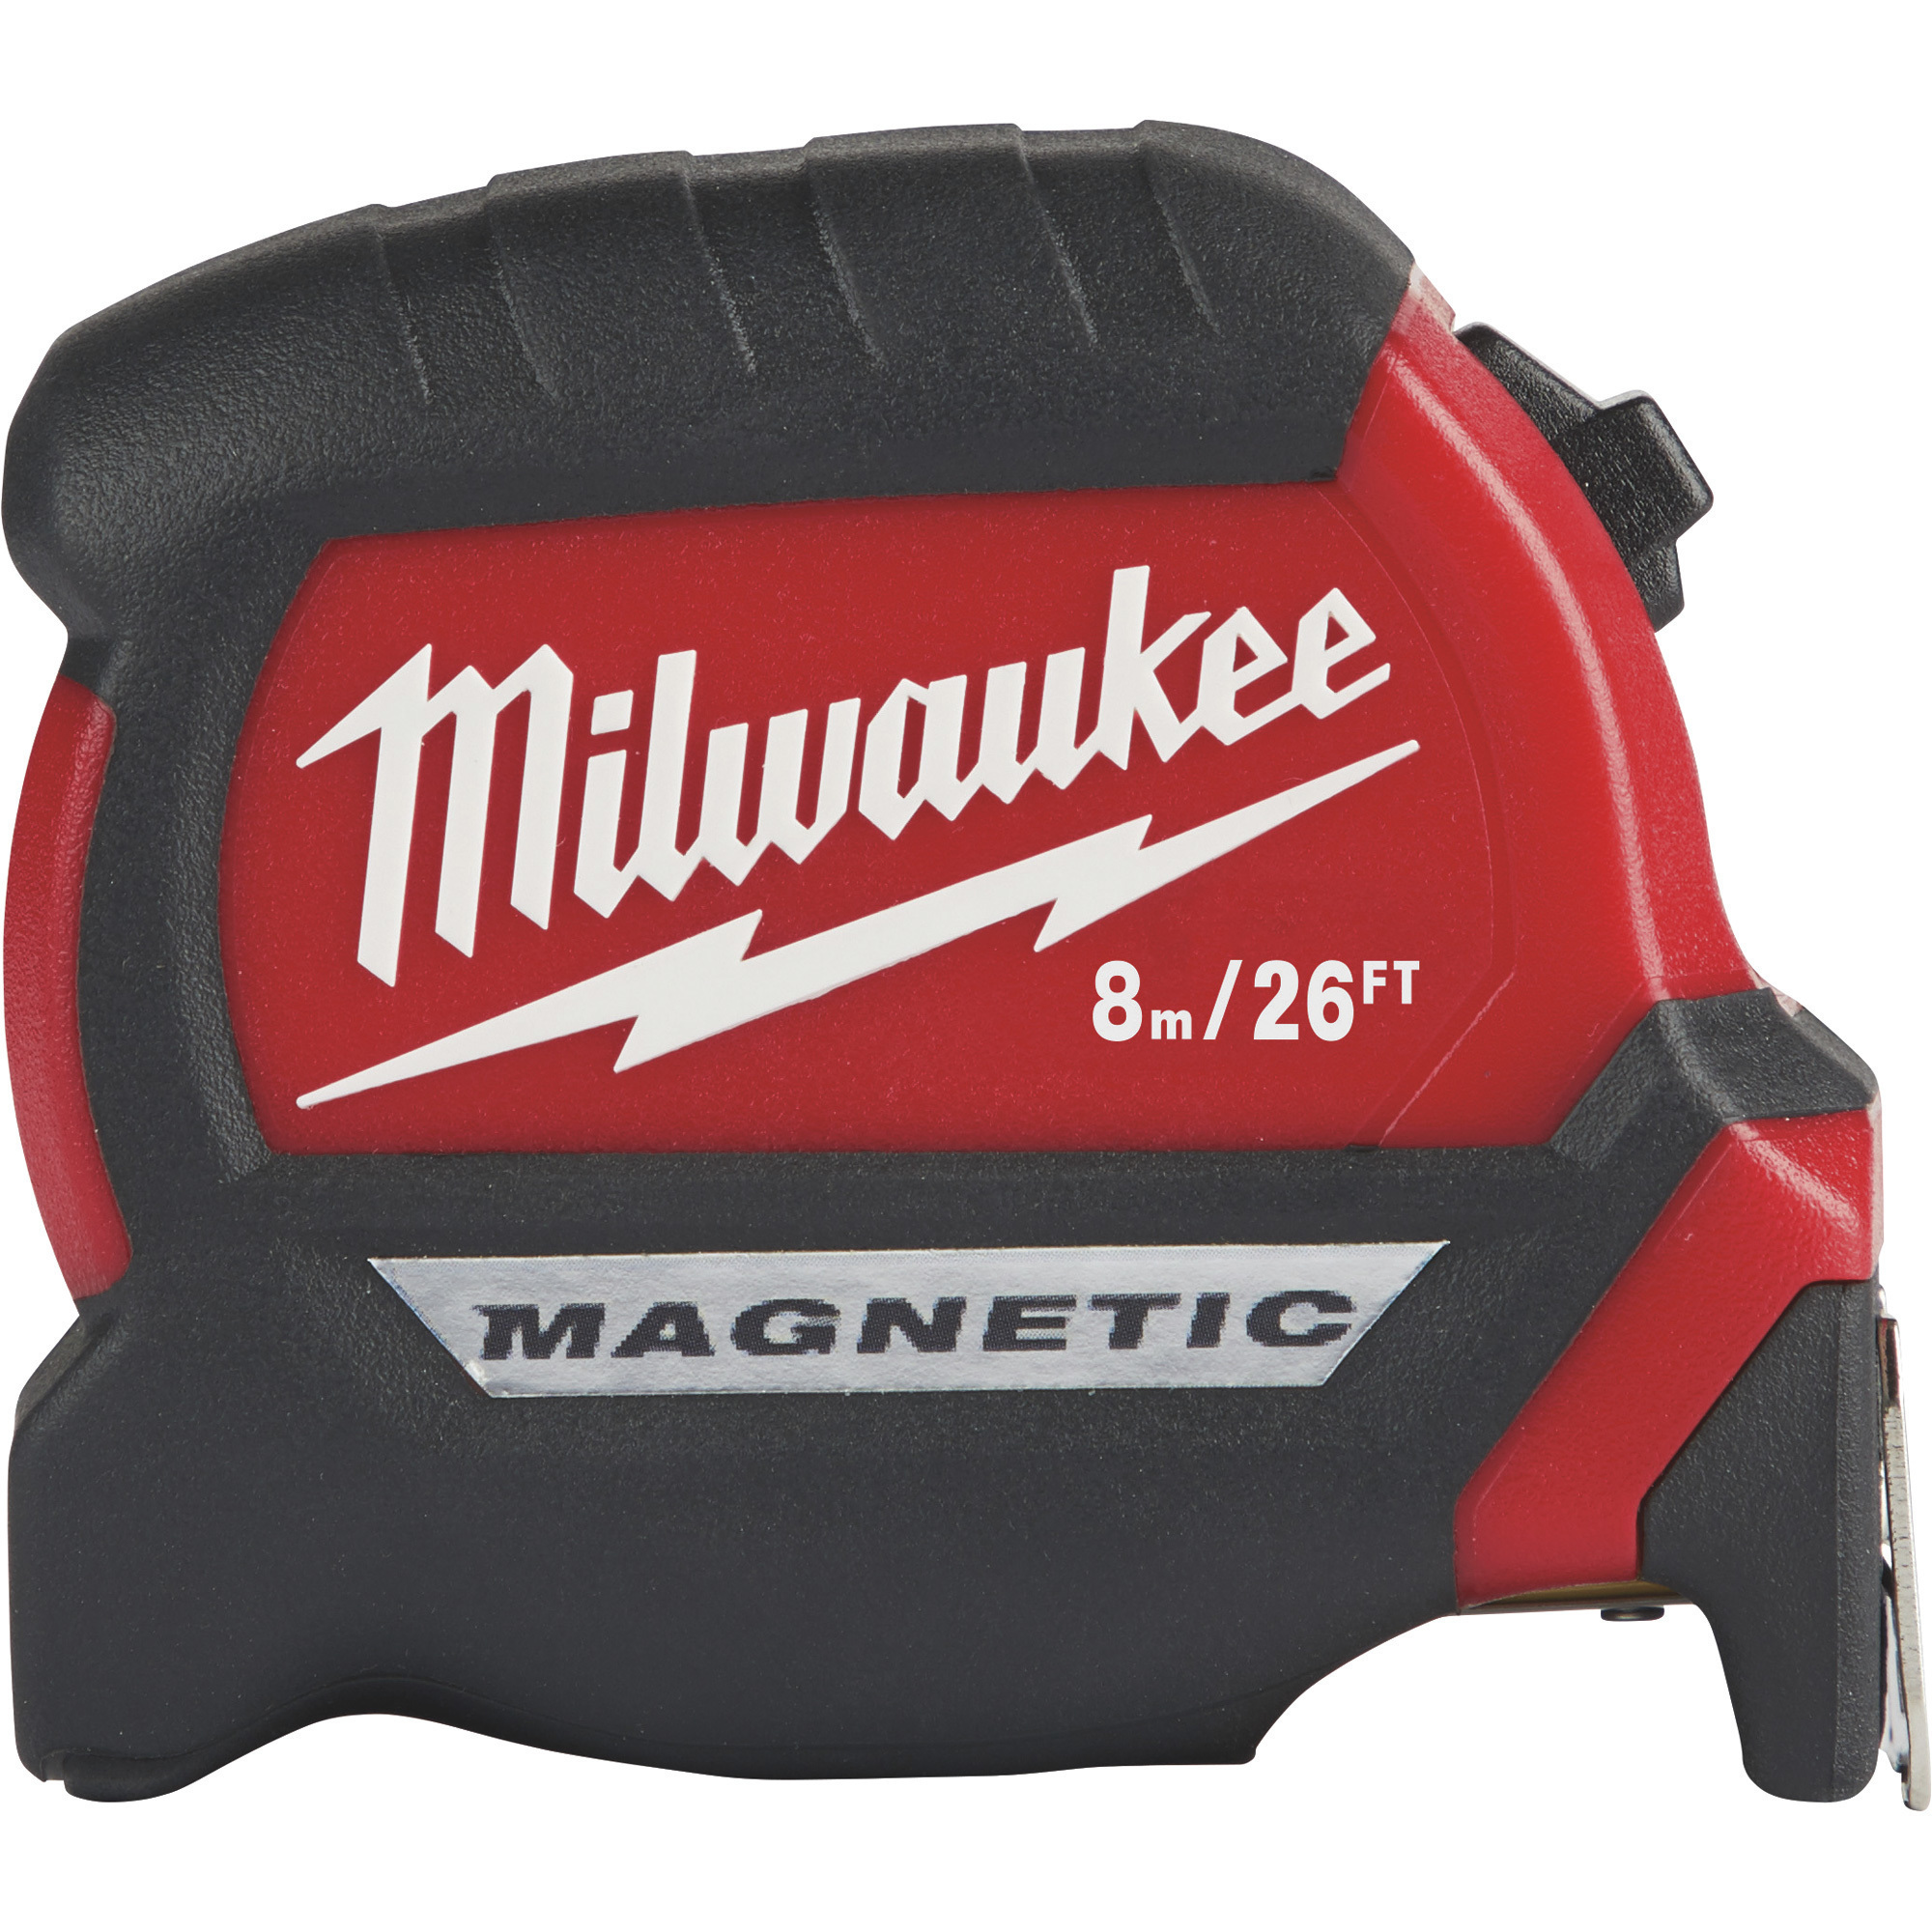 Milwaukee 8m/26ft. Compact Magnetic Tape Measure, Model 48-22-0326